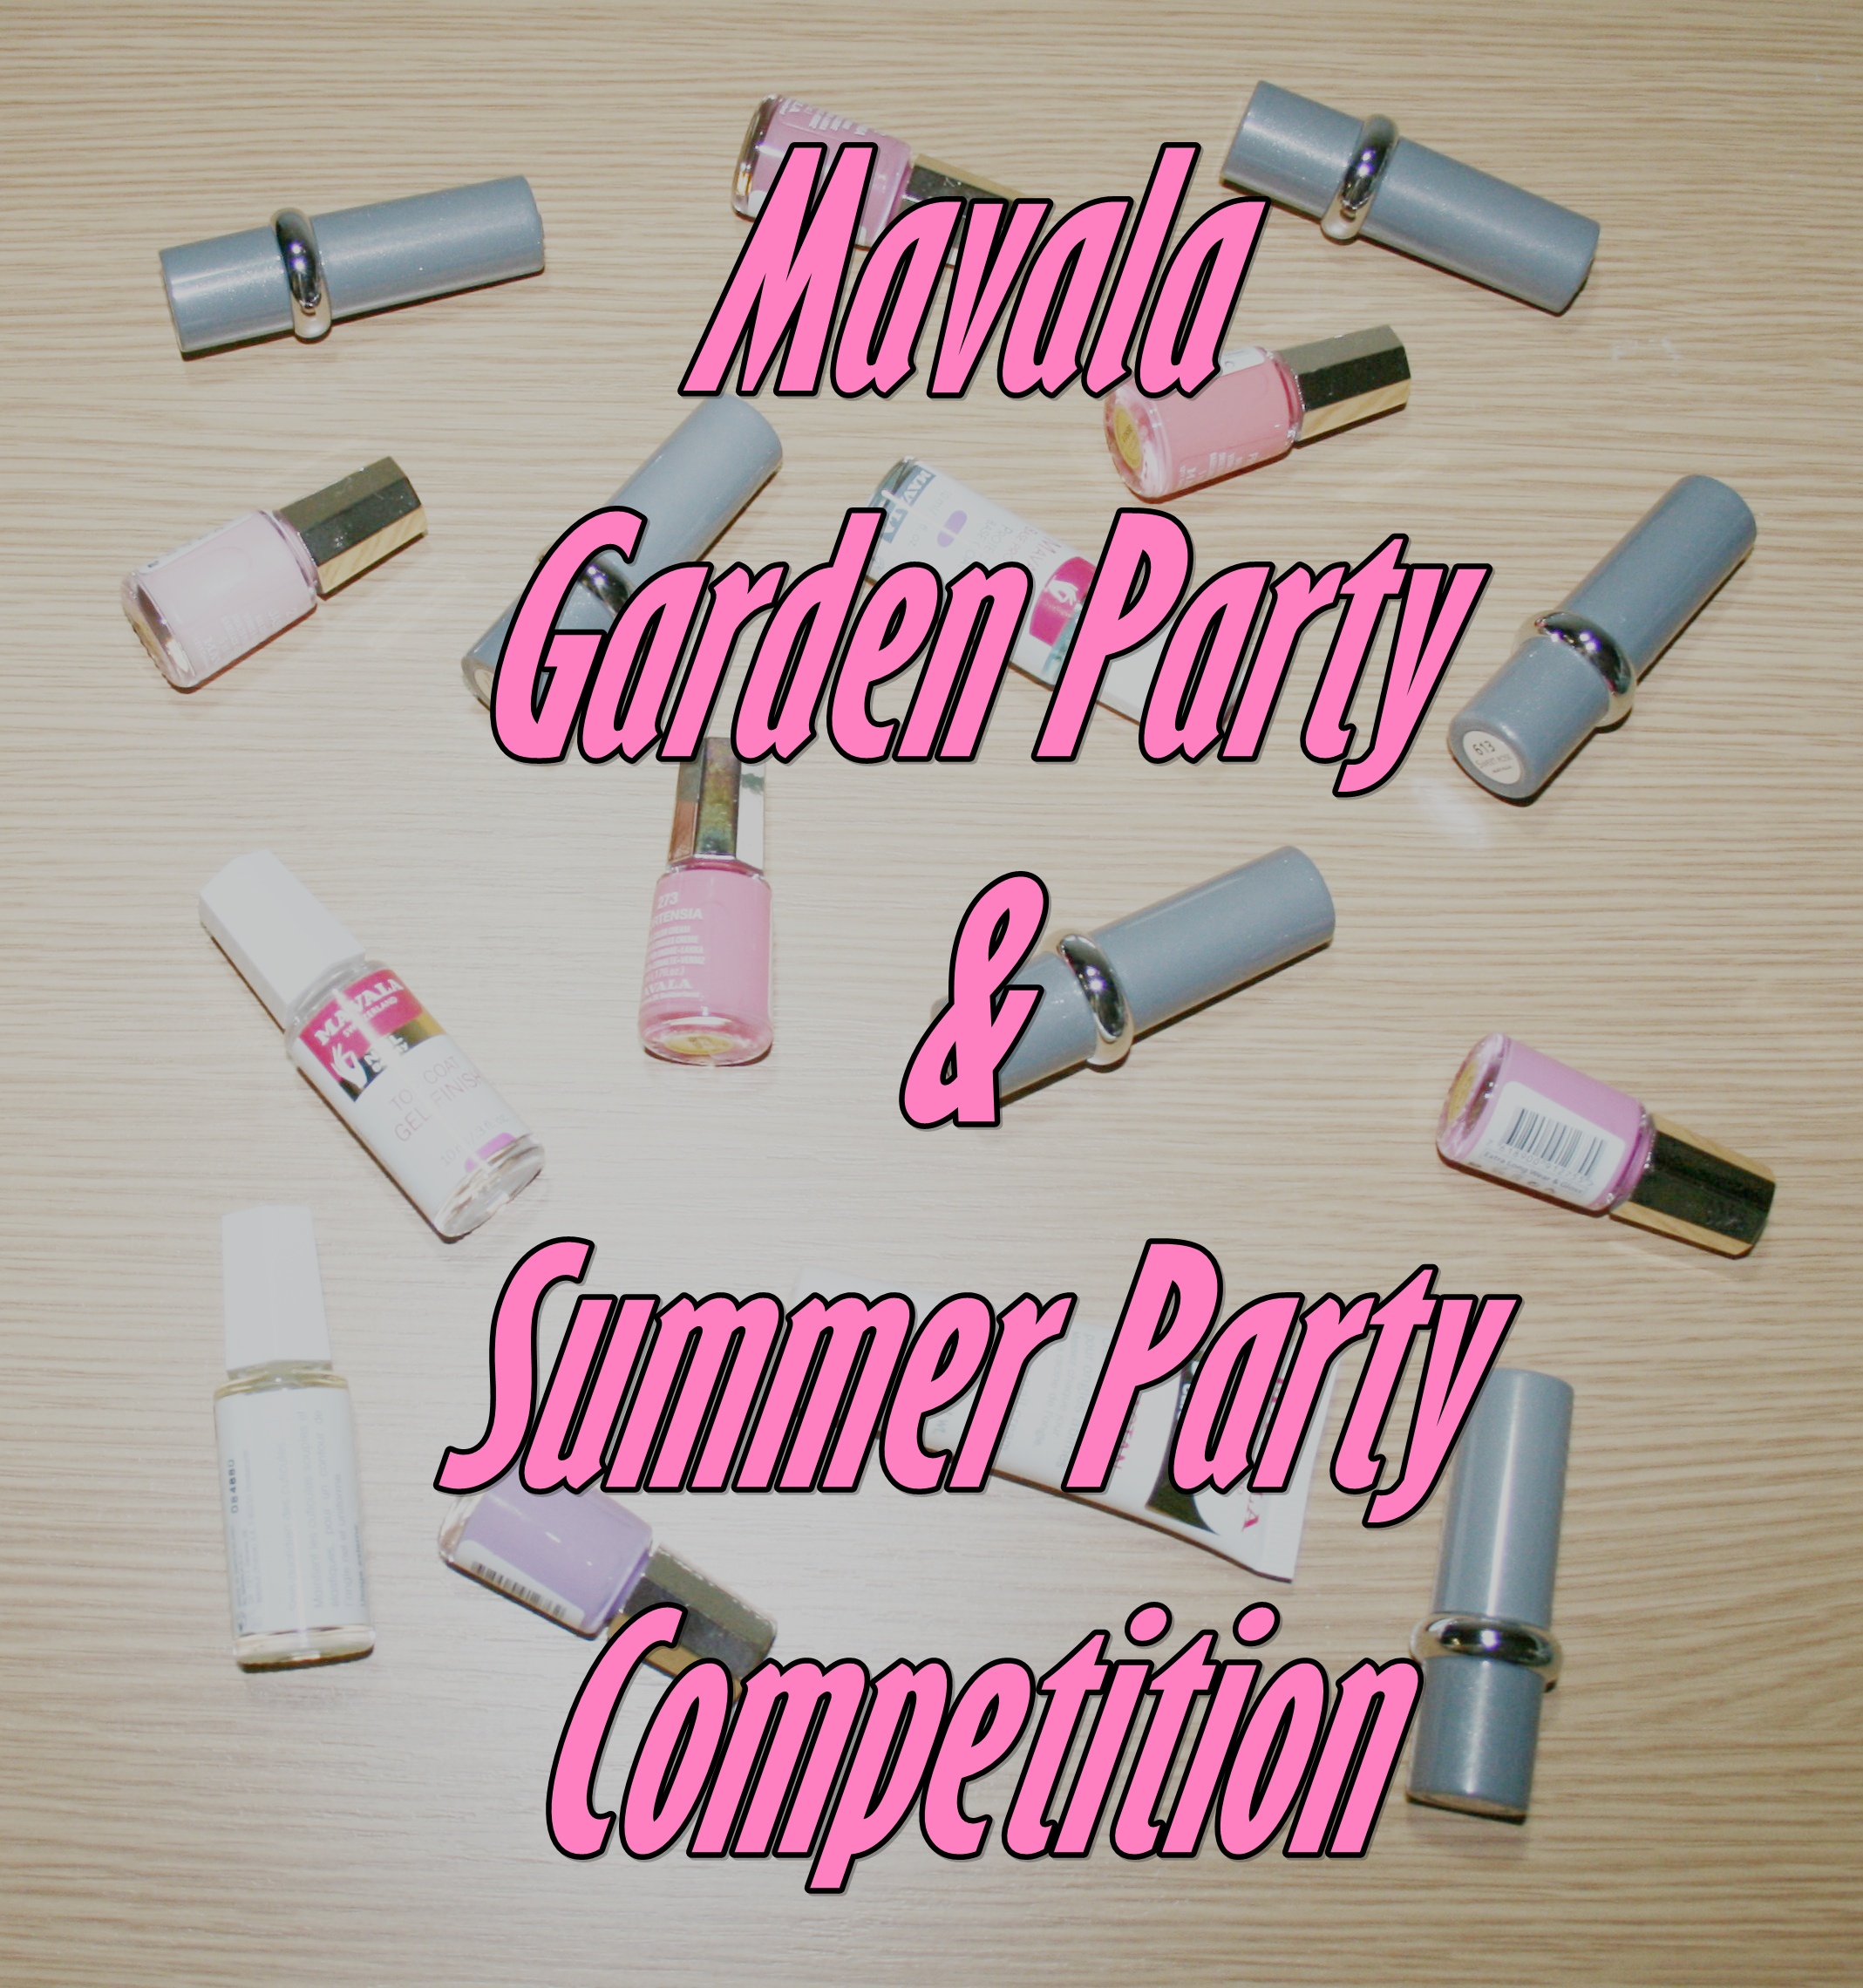 Competition: 2 x Mavala Lip and Nail Bundles (Garden Party and Summer Party)